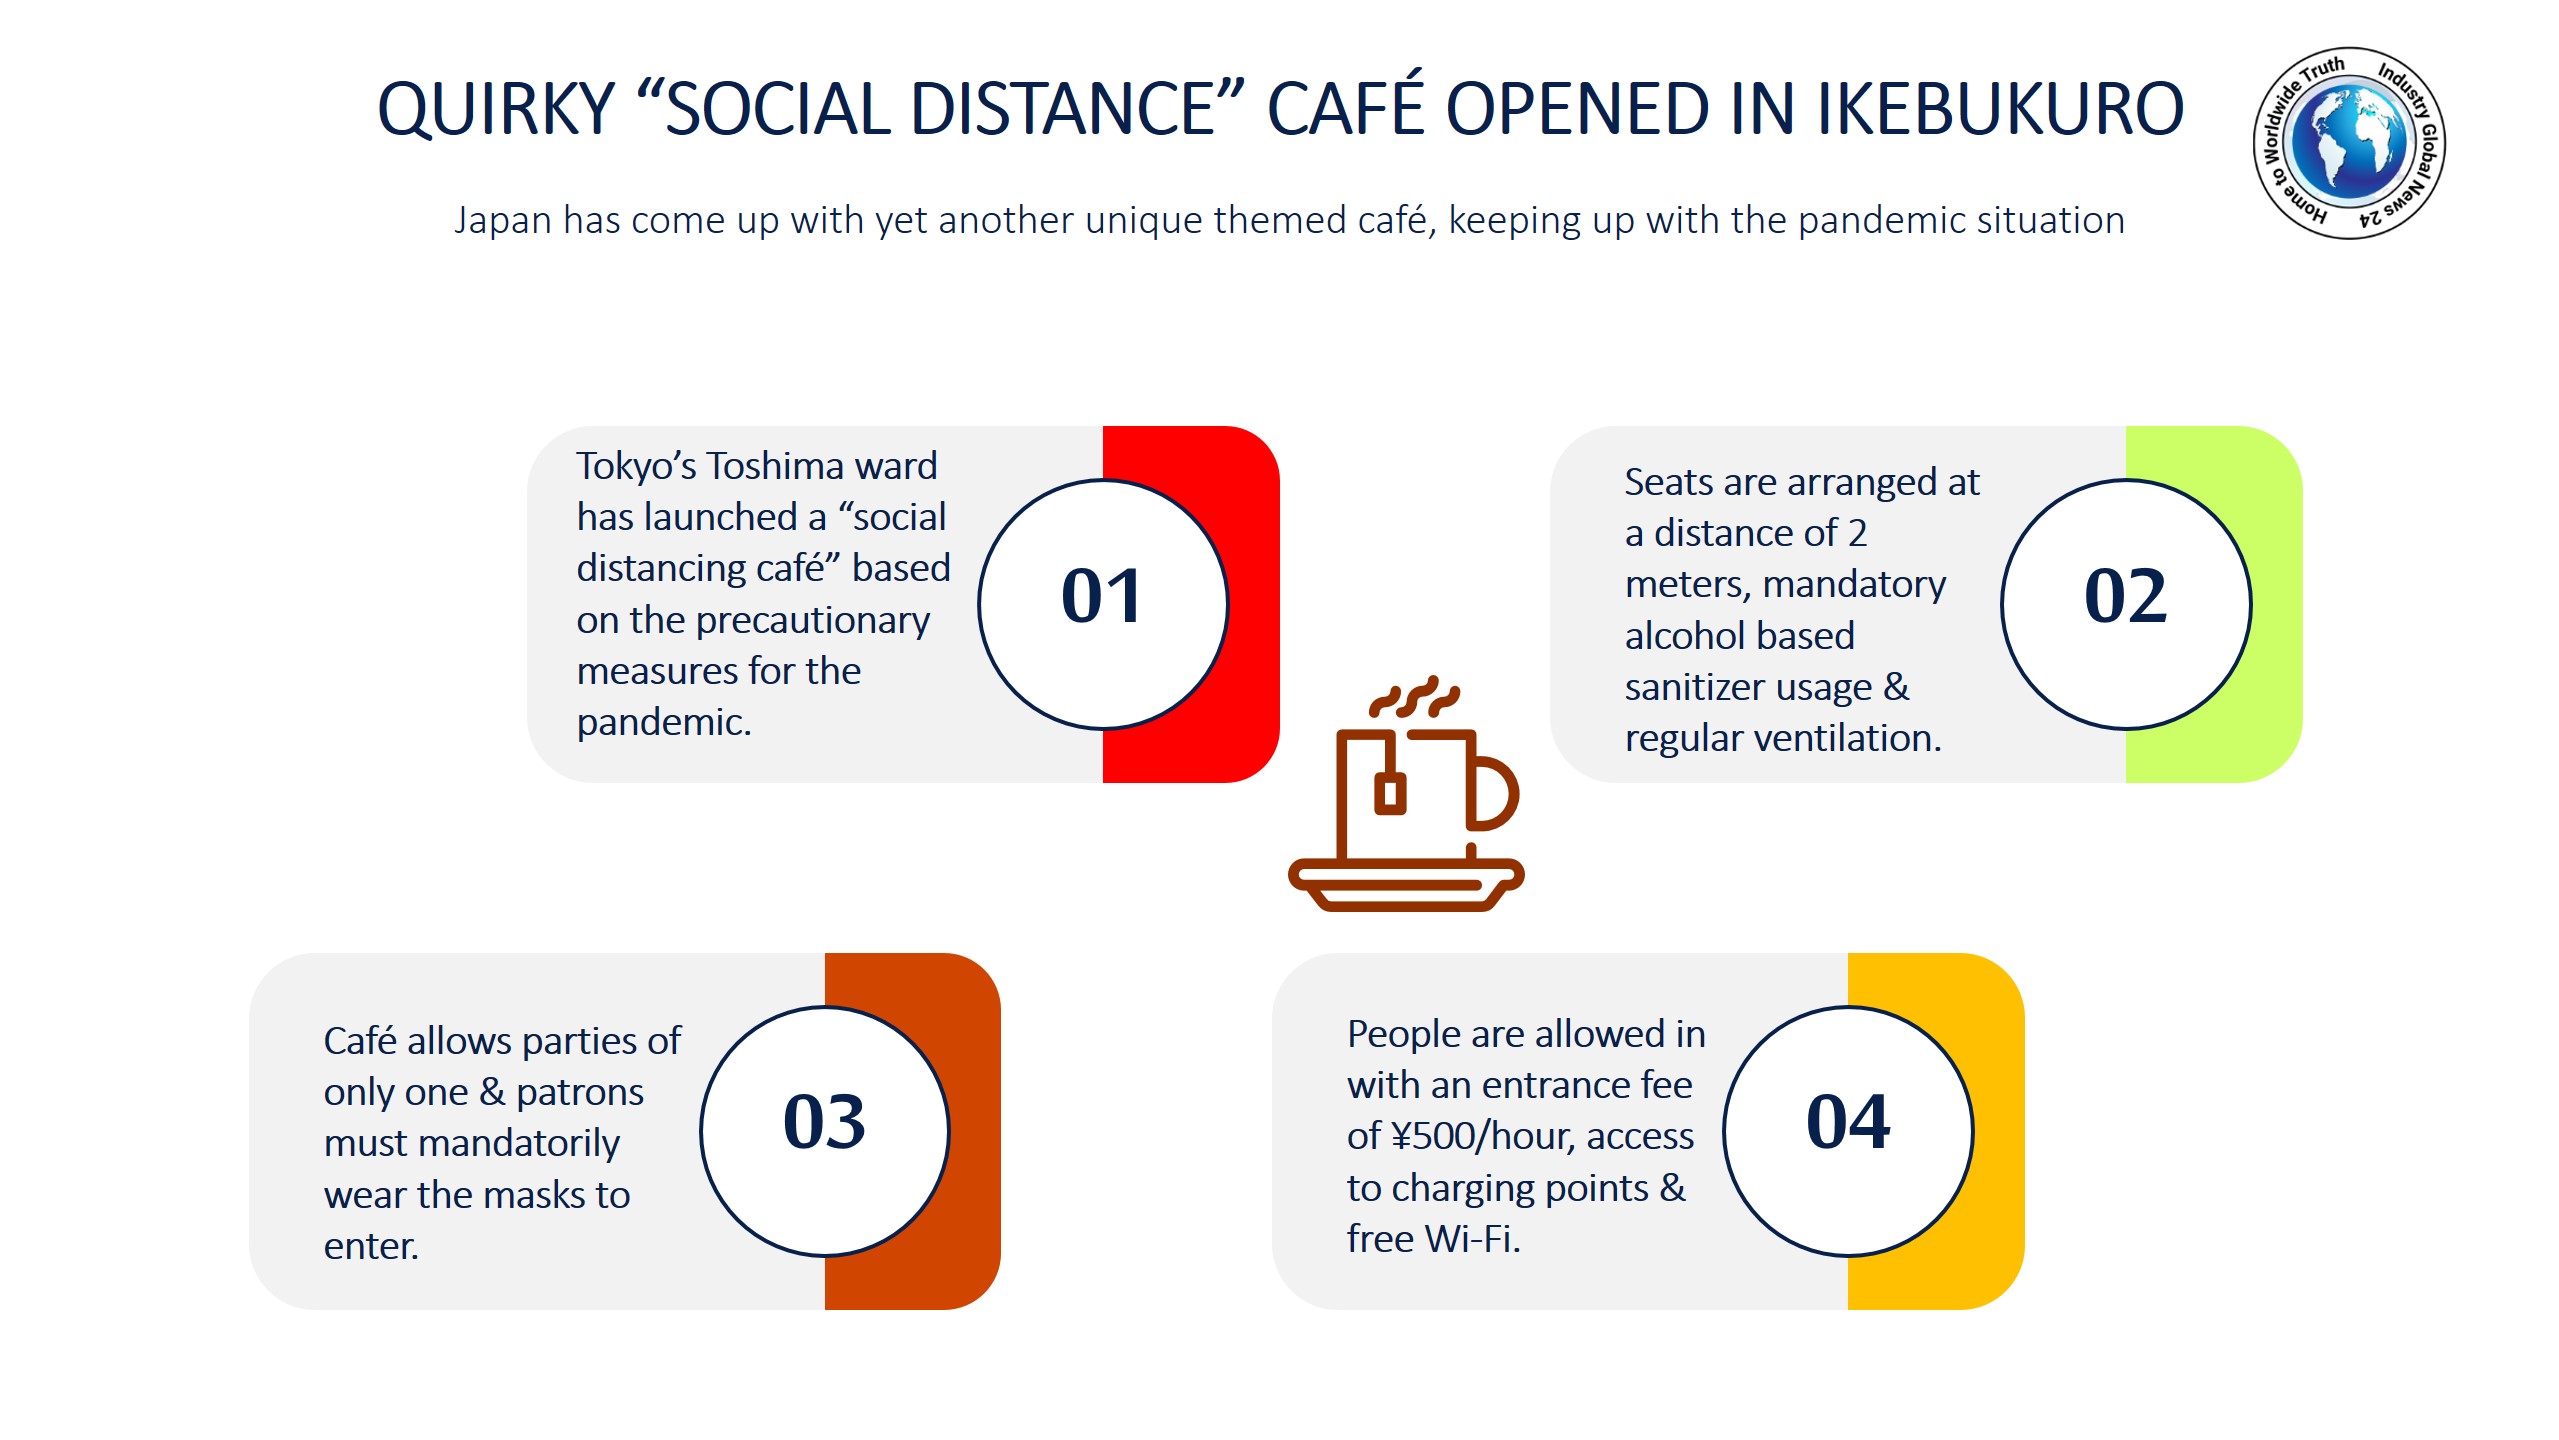 Quirky “Social Distance” café opened in Ikebukuro